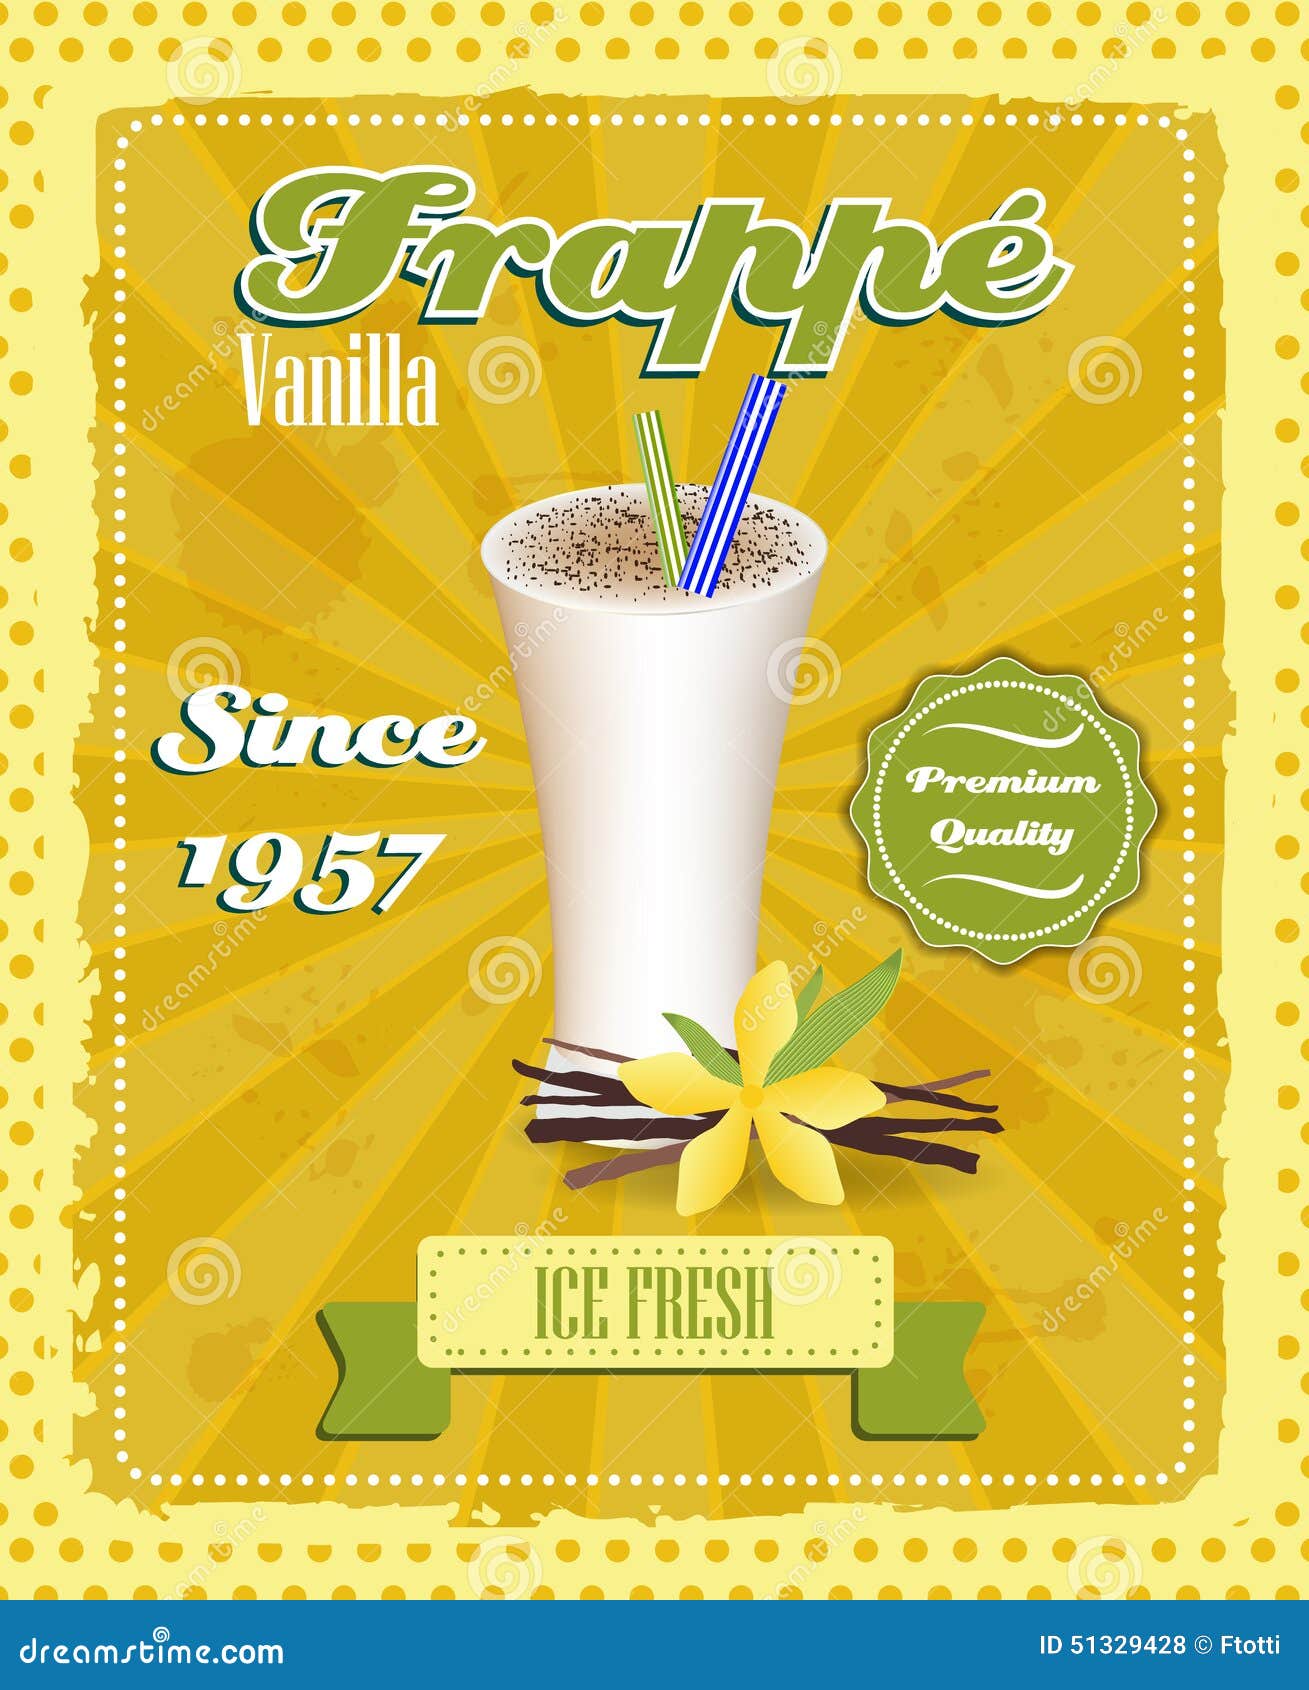 vanilla frappe poster with drinking strew and glass in retro style